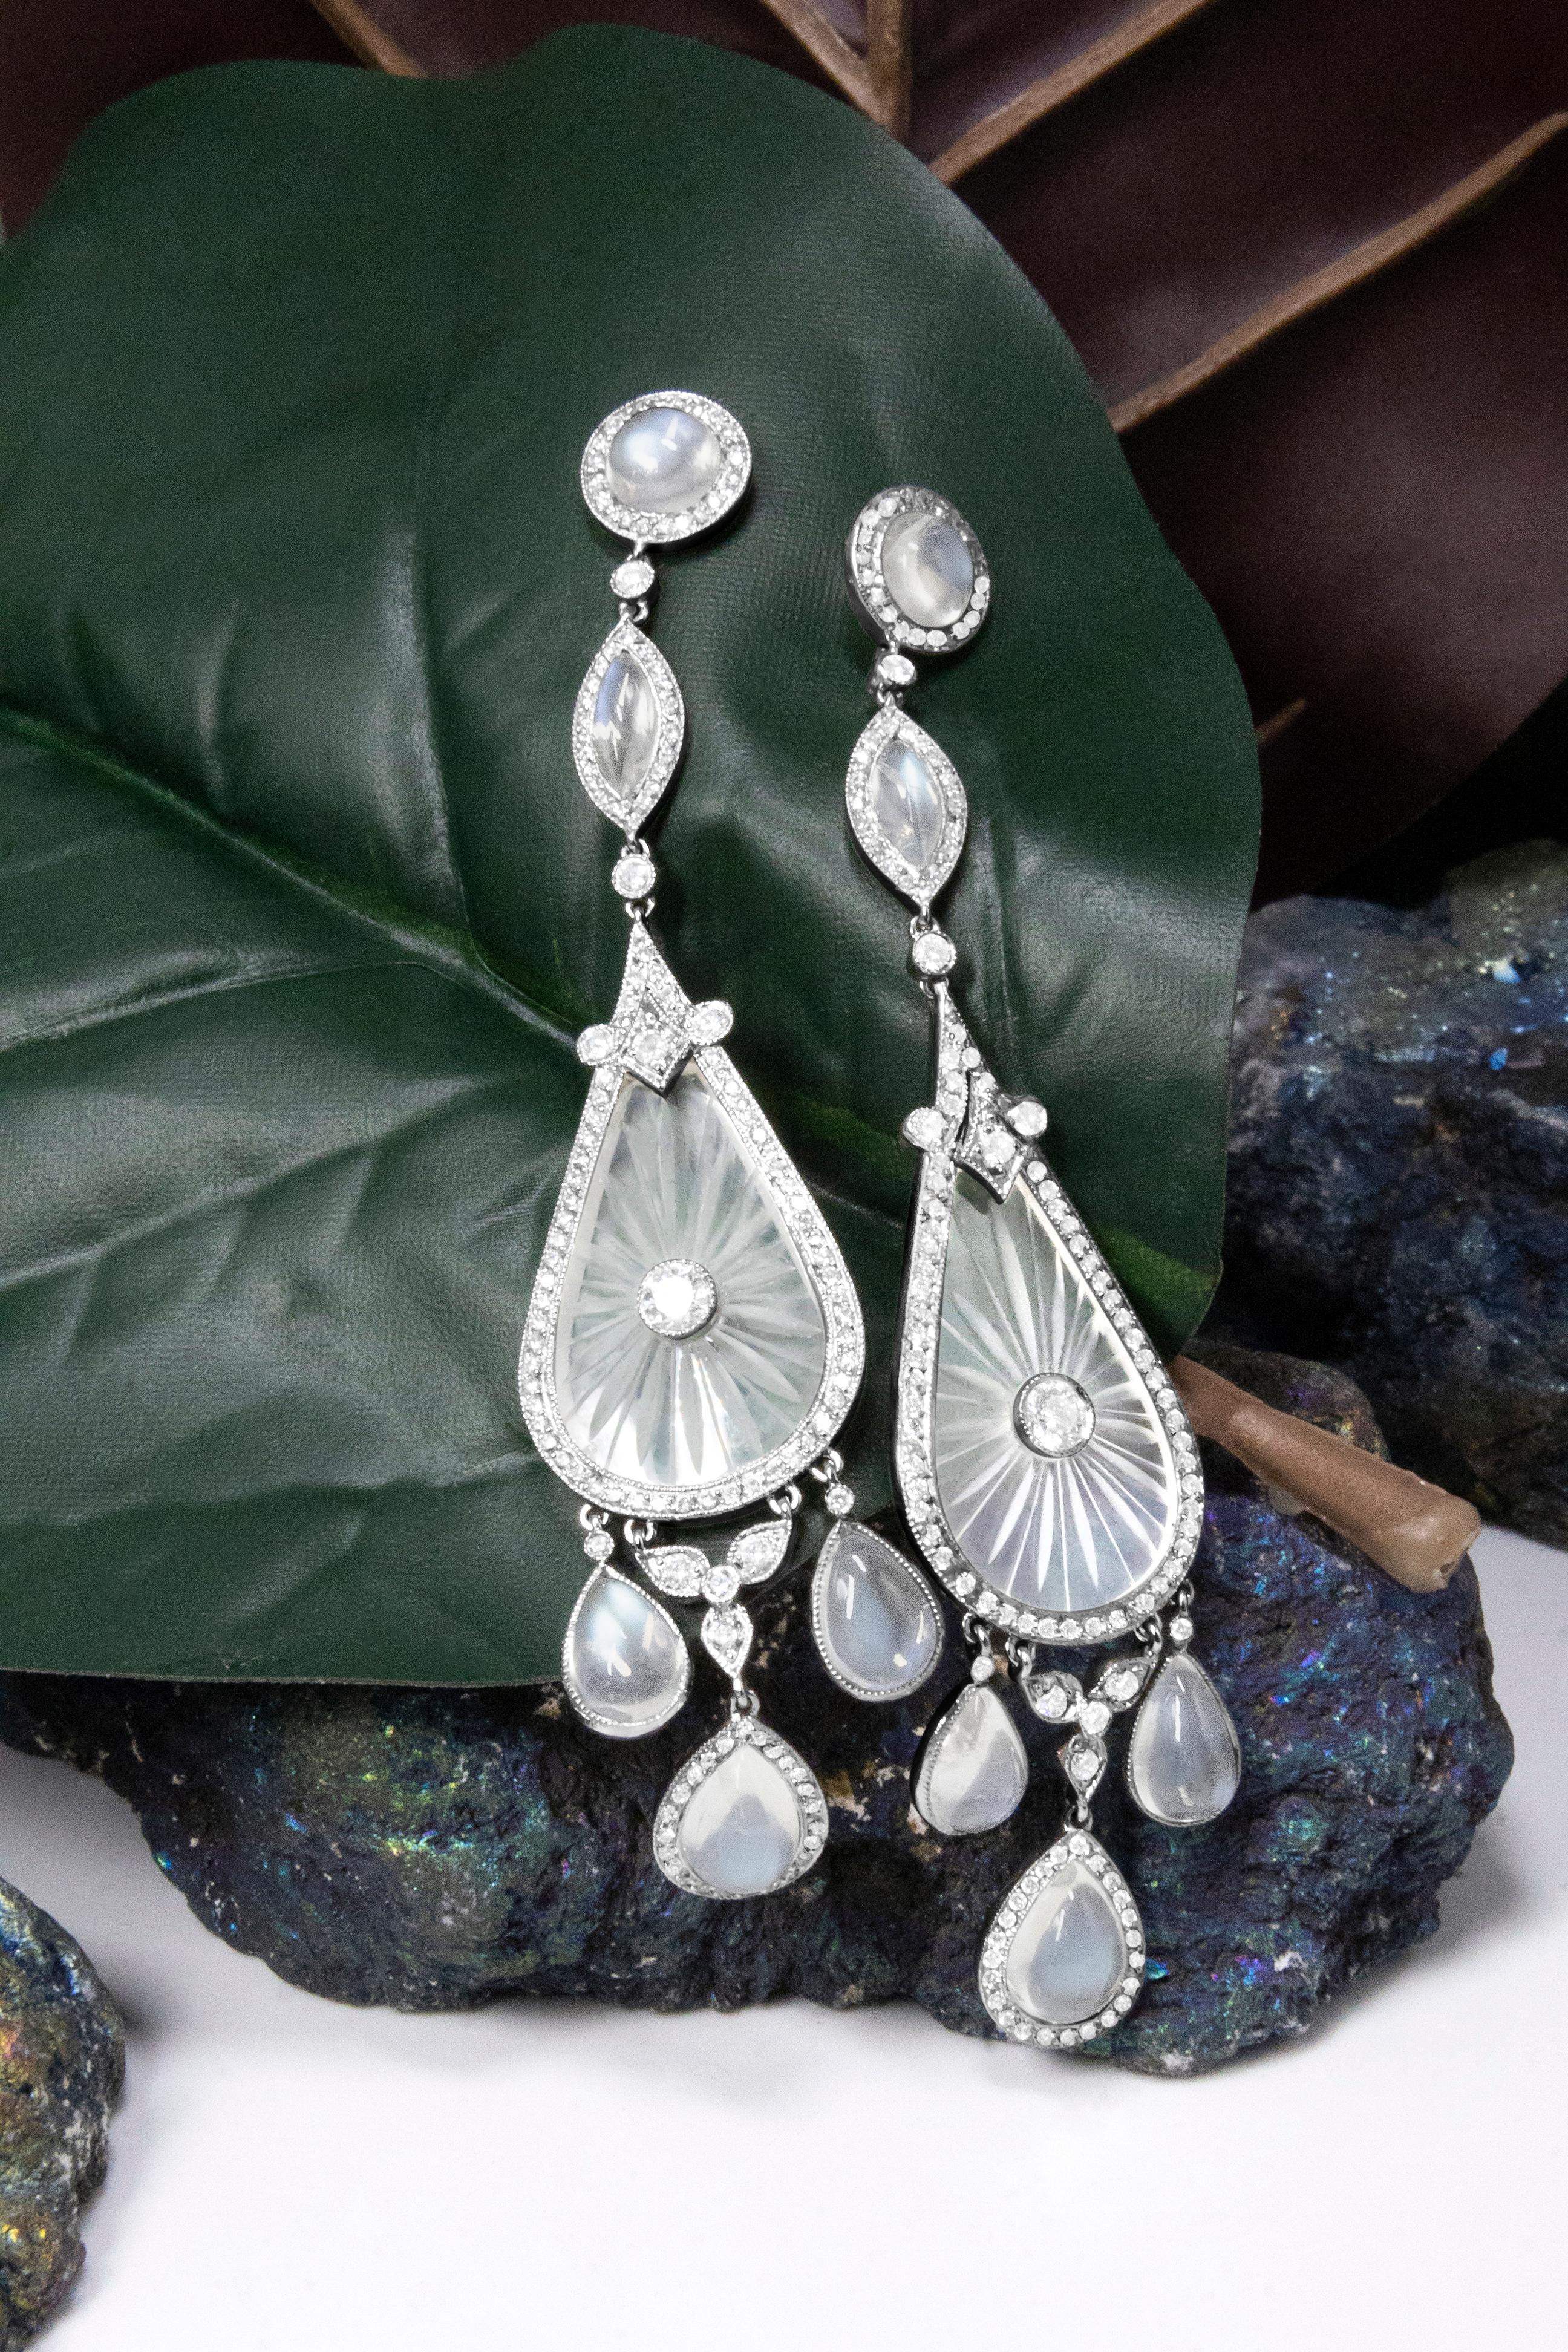 Contemporary Platinum 1 5/8 Ct Diamond, Moon Stone & Hand-Carved Rock Crystal Dangle Earrings